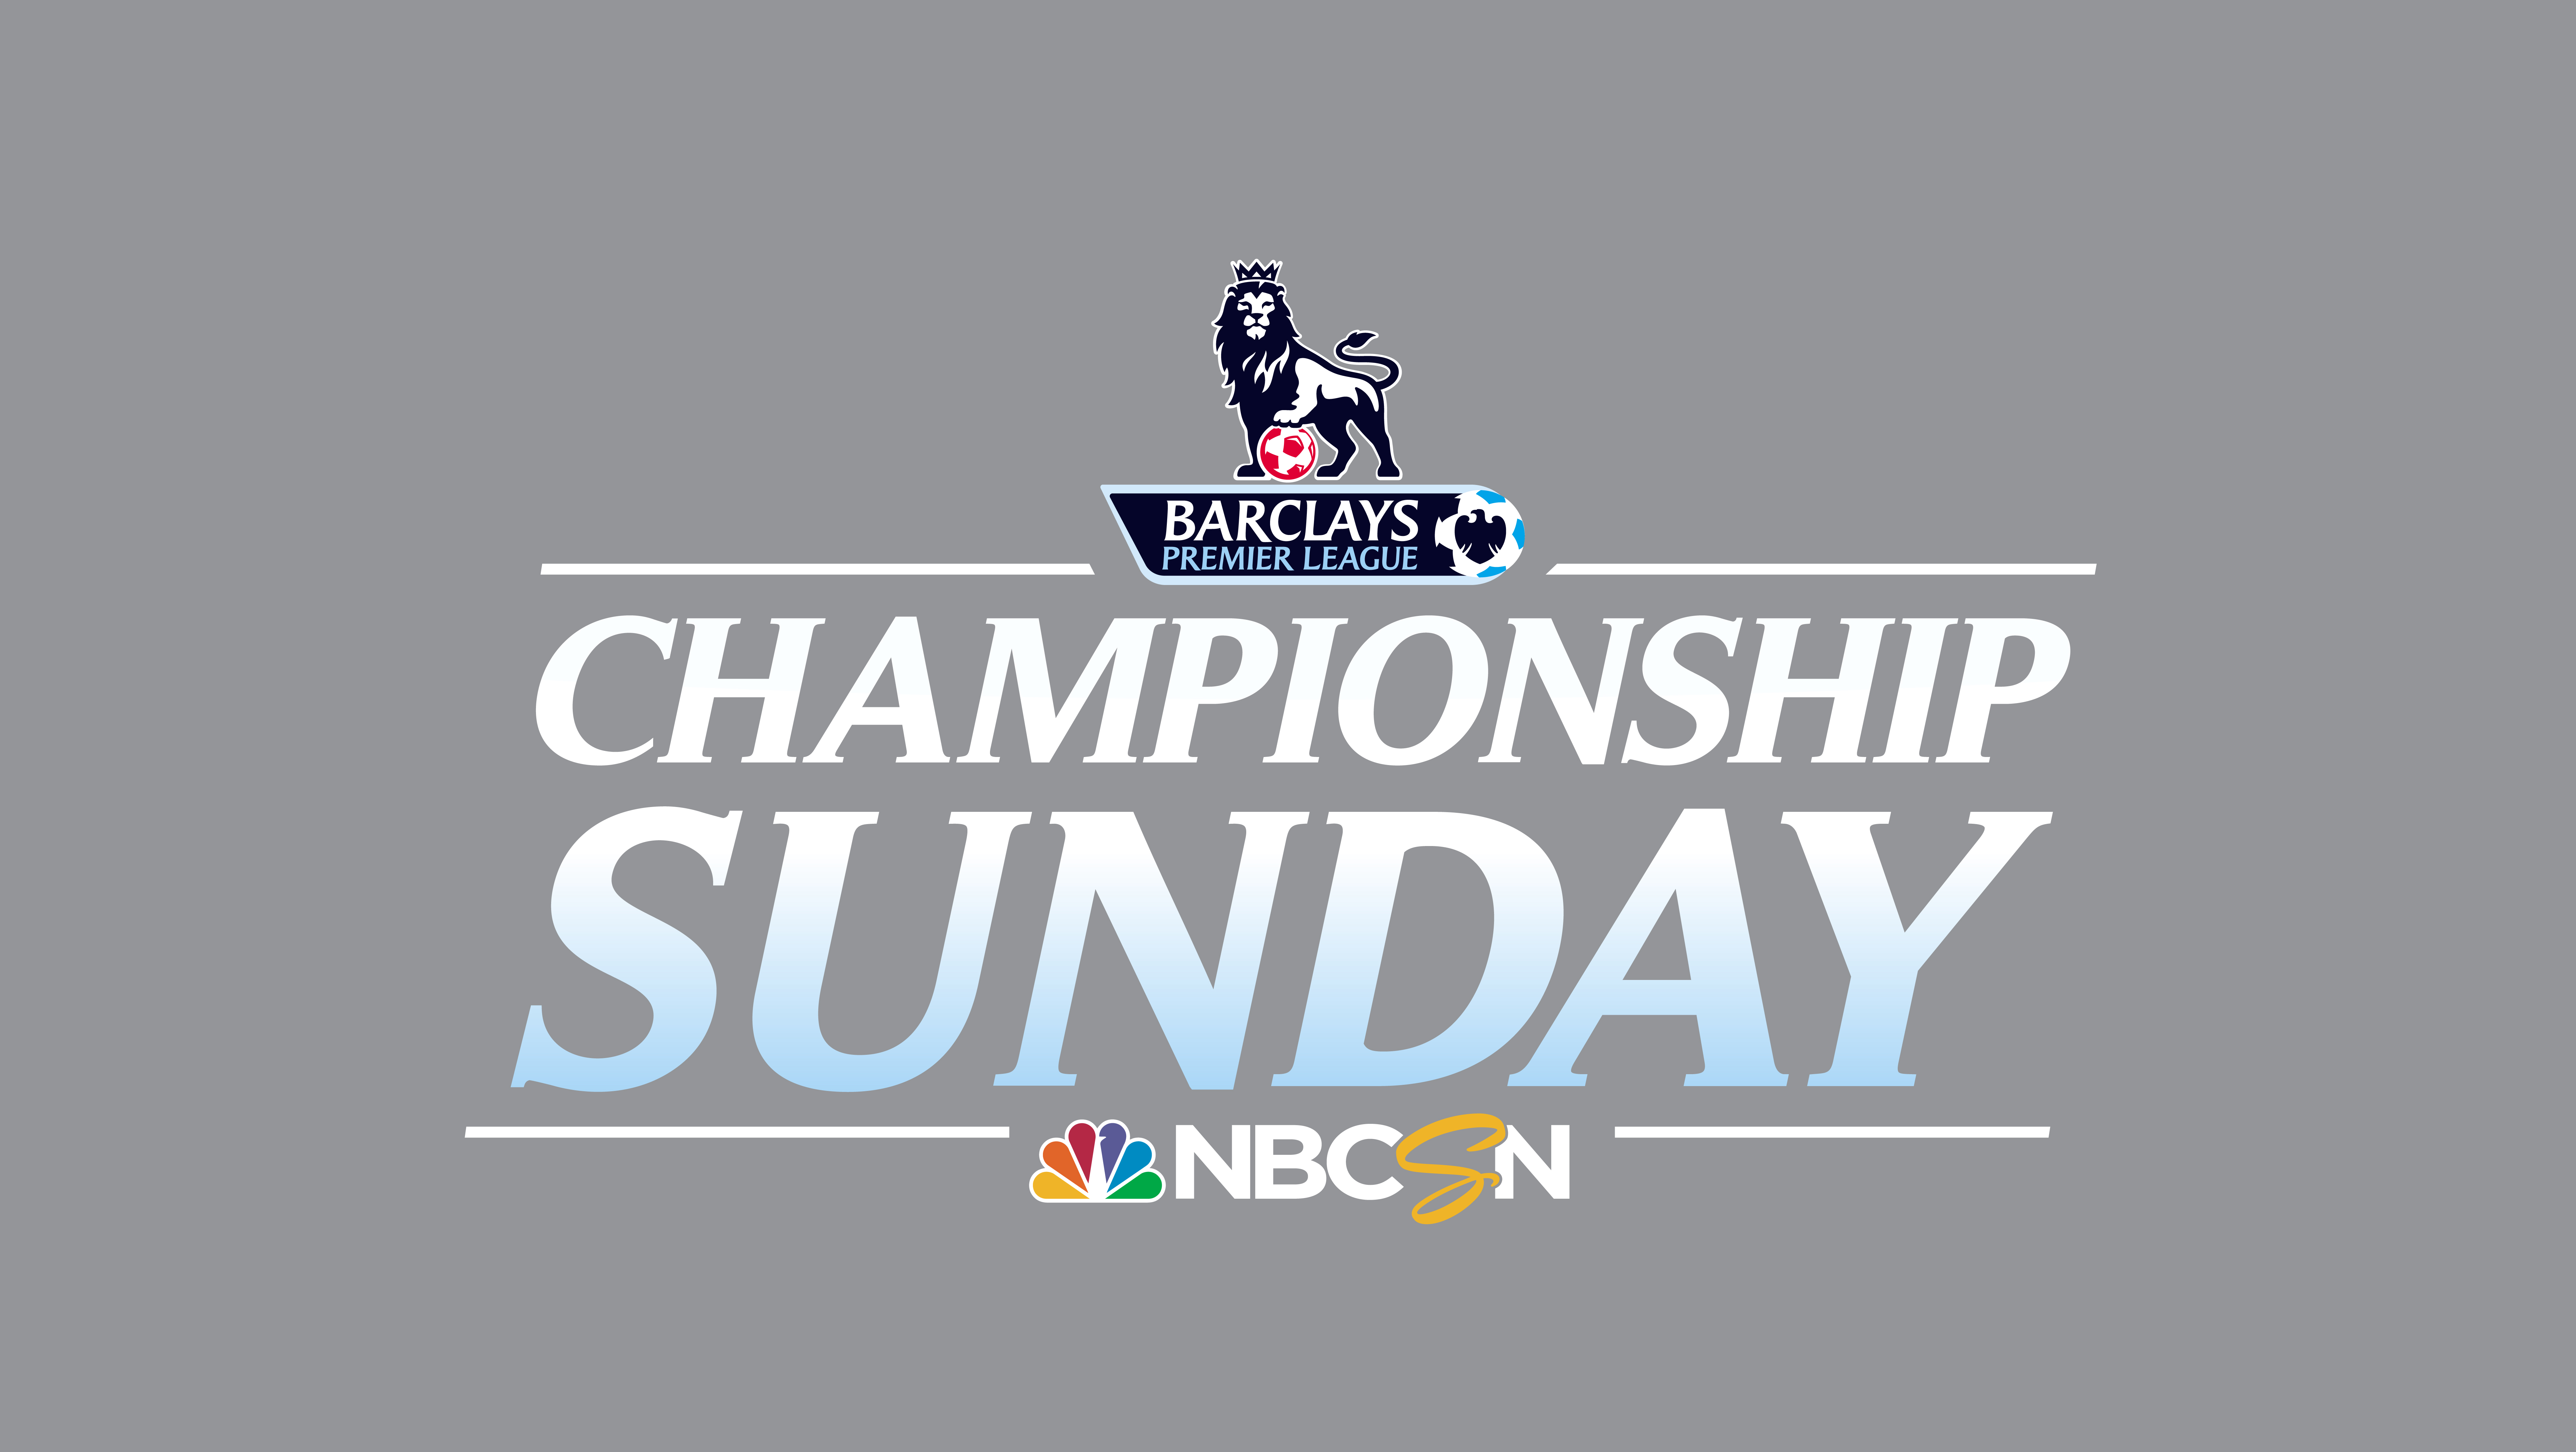 NBCU Presents All 10 Premier League Championship Sunday Matches Across 10 Networks